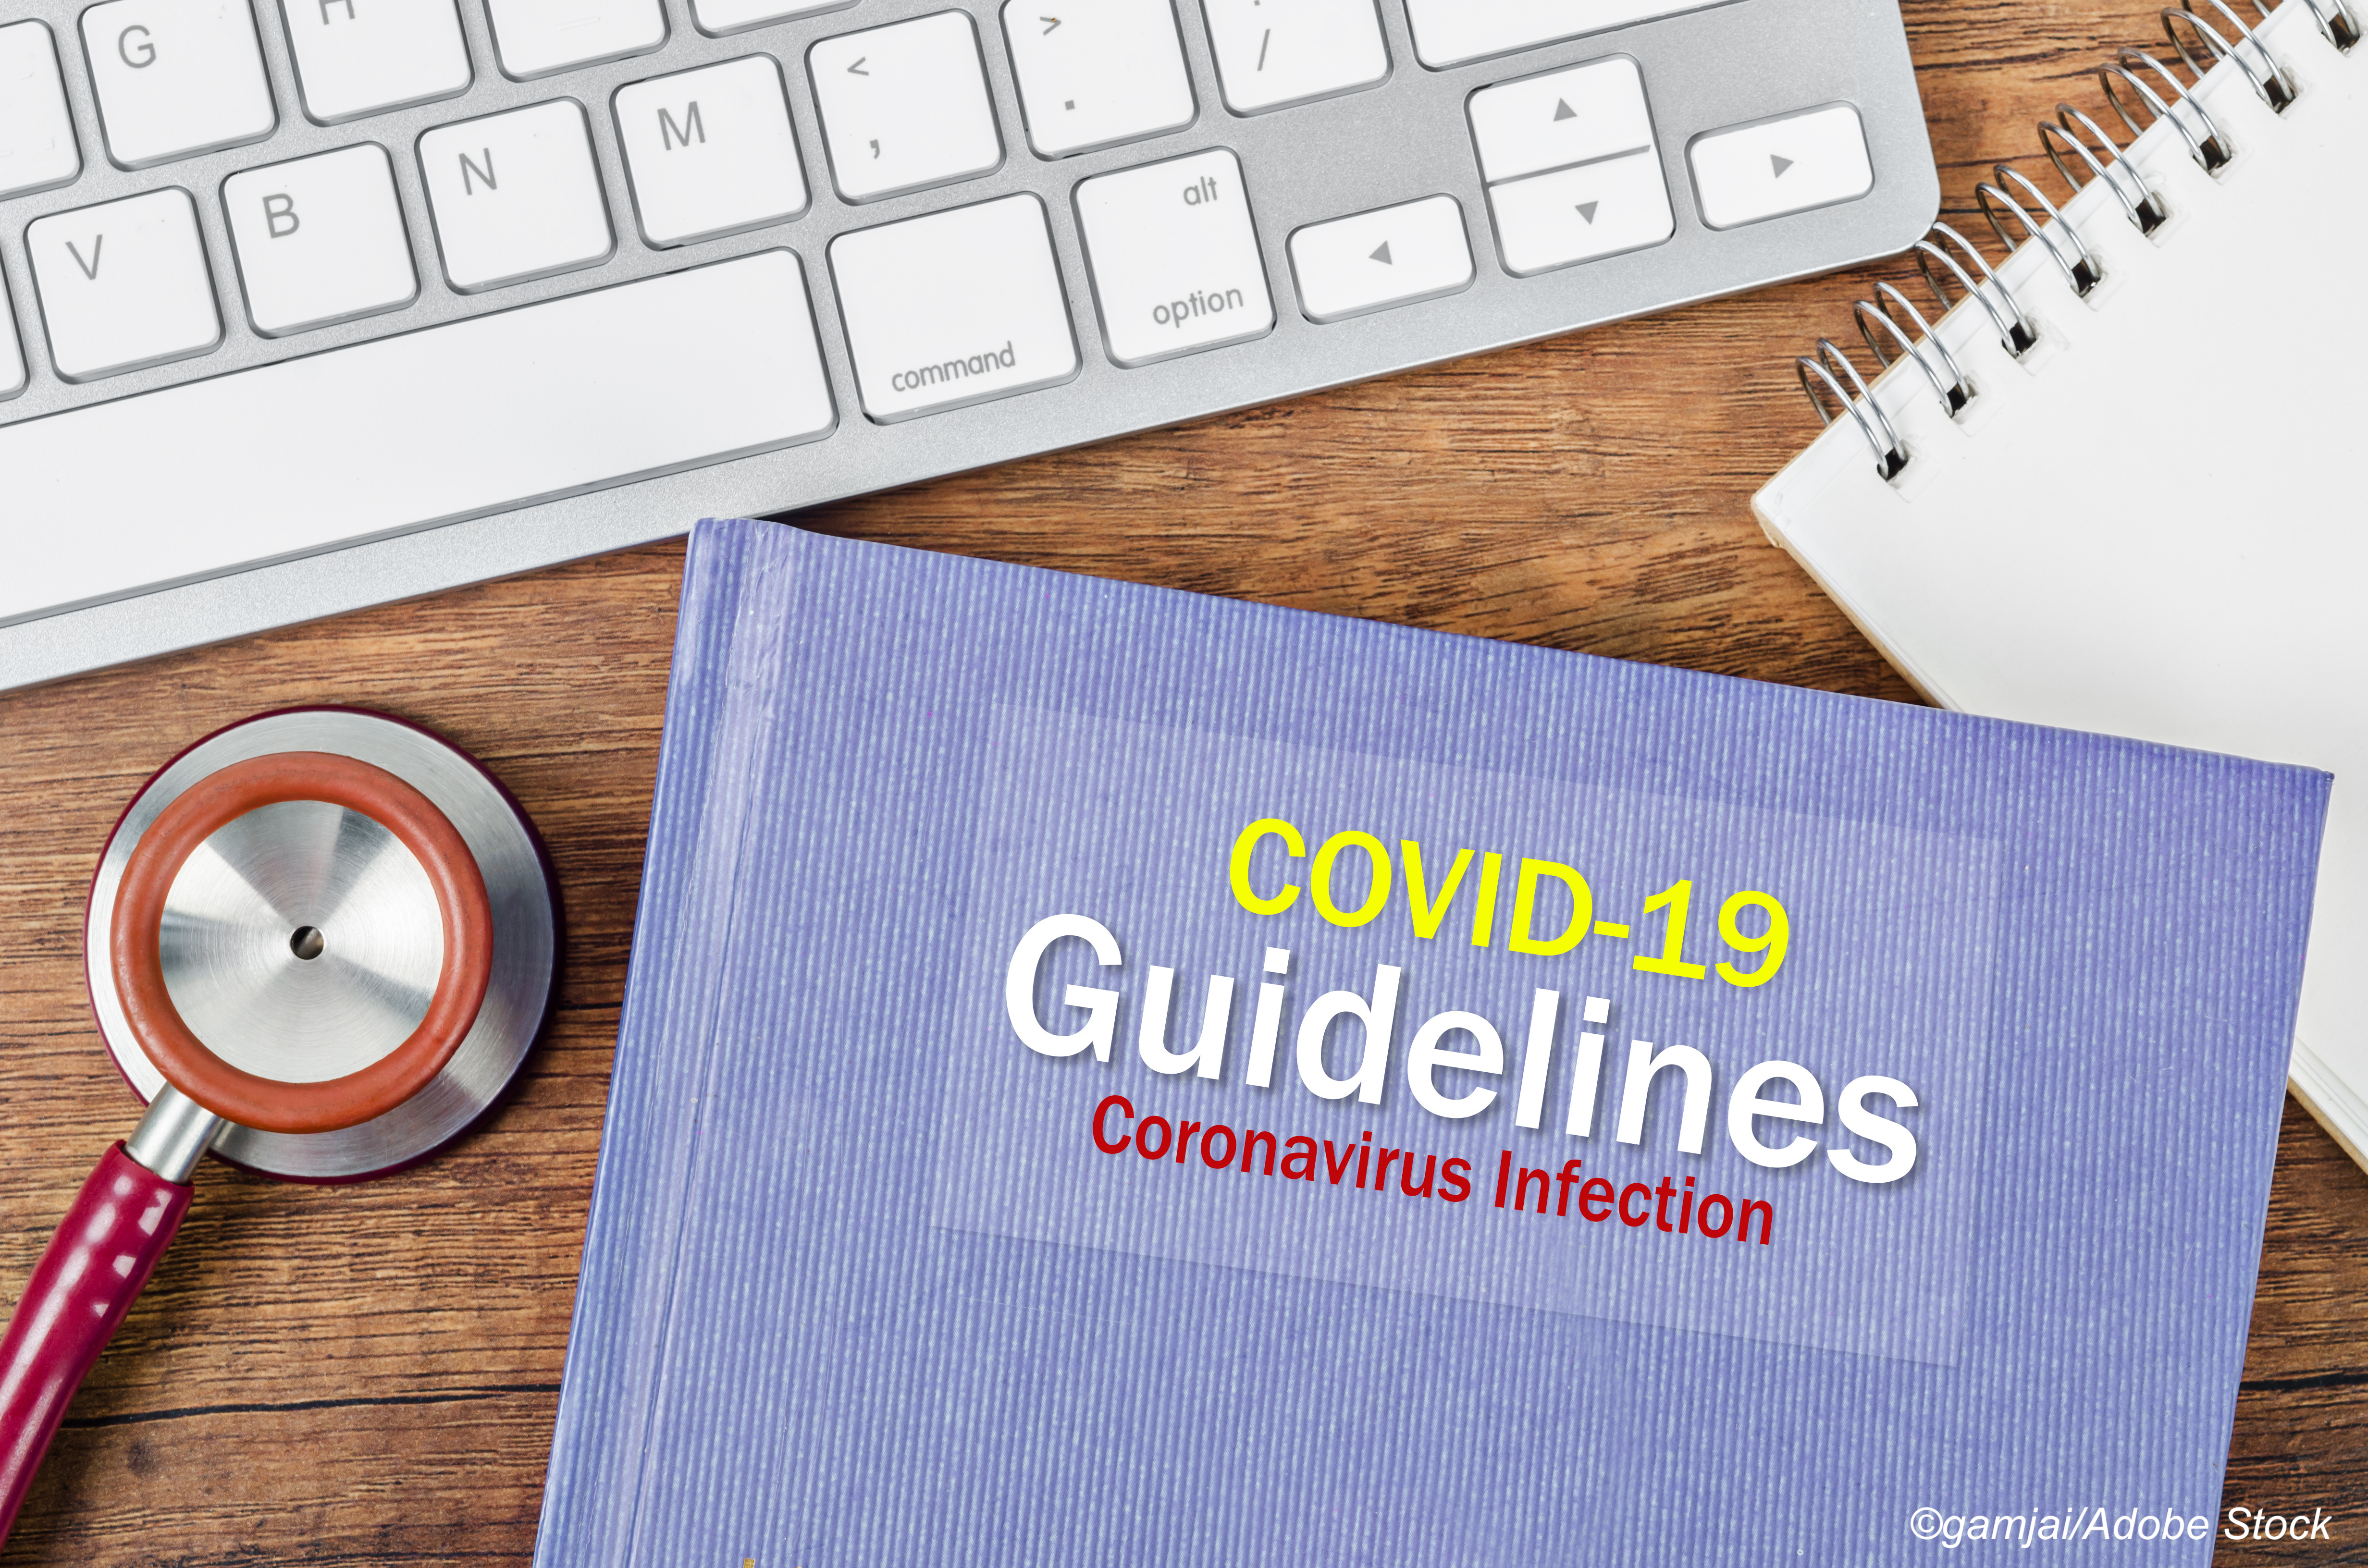 Covid-19: Quality of Most Rx Treatment Guidelines Poor, Review Finds